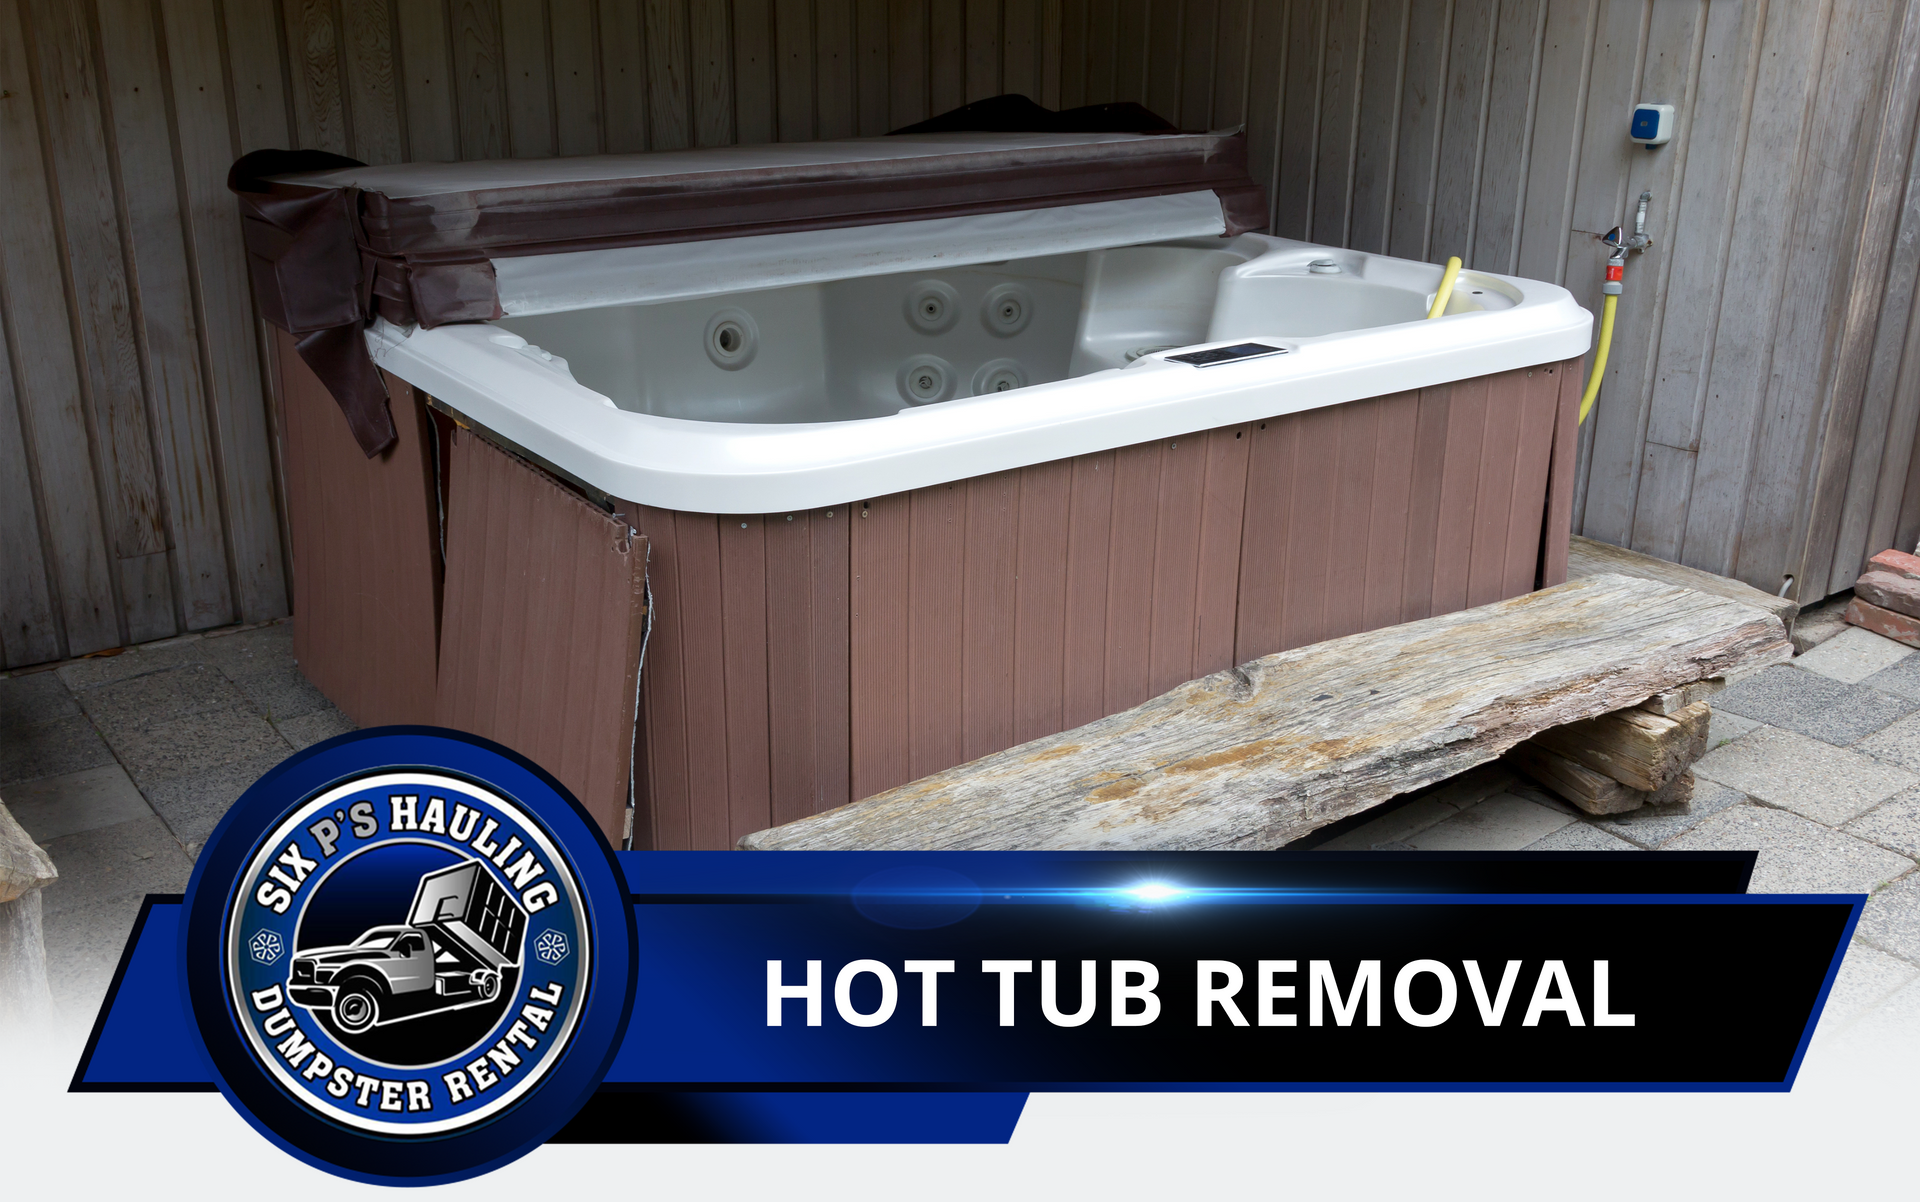 Hot Tub Removal in Claremont, CA